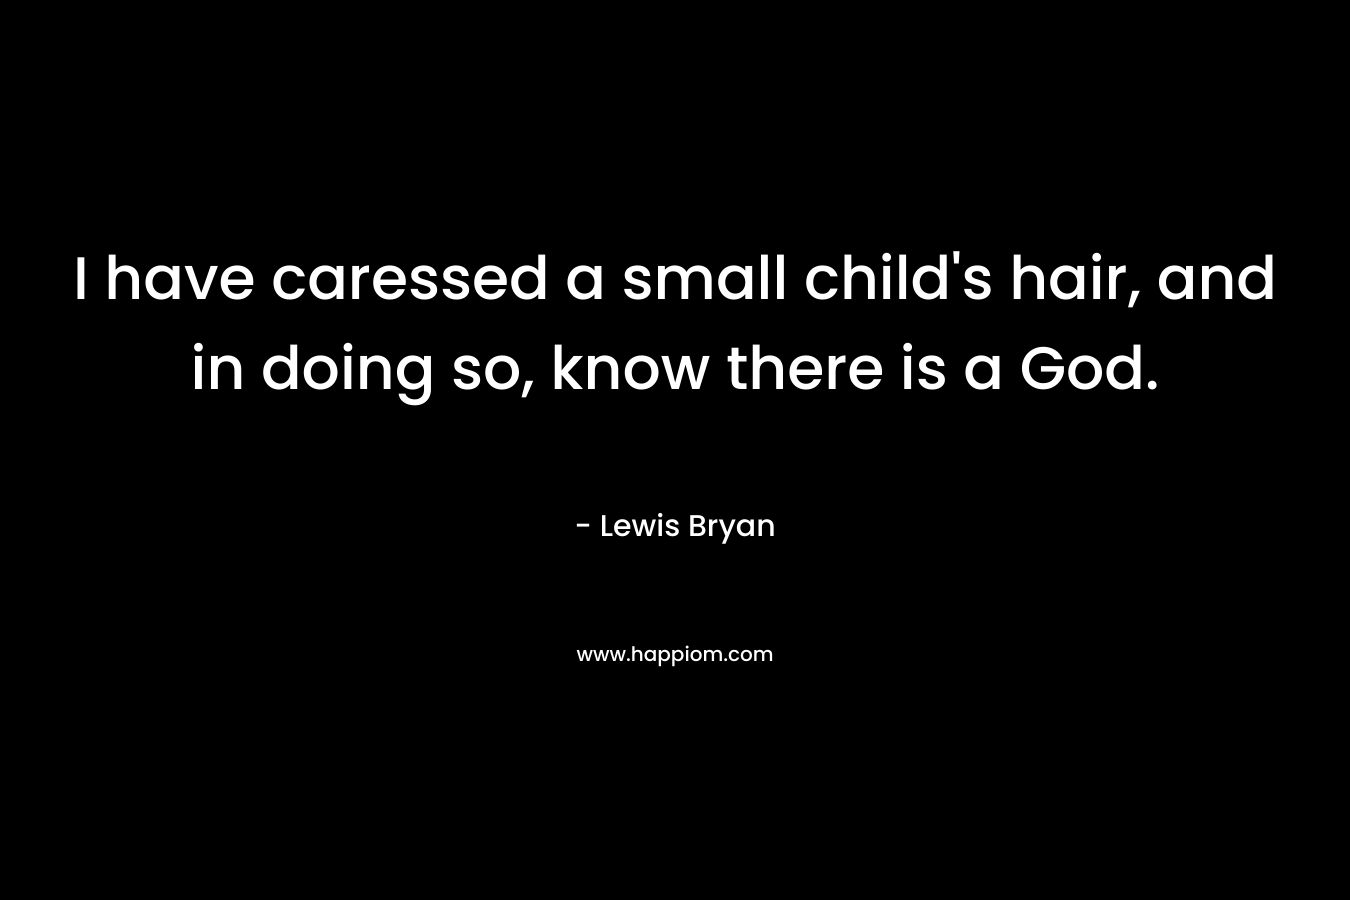 I have caressed a small child's hair, and in doing so, know there is a God.